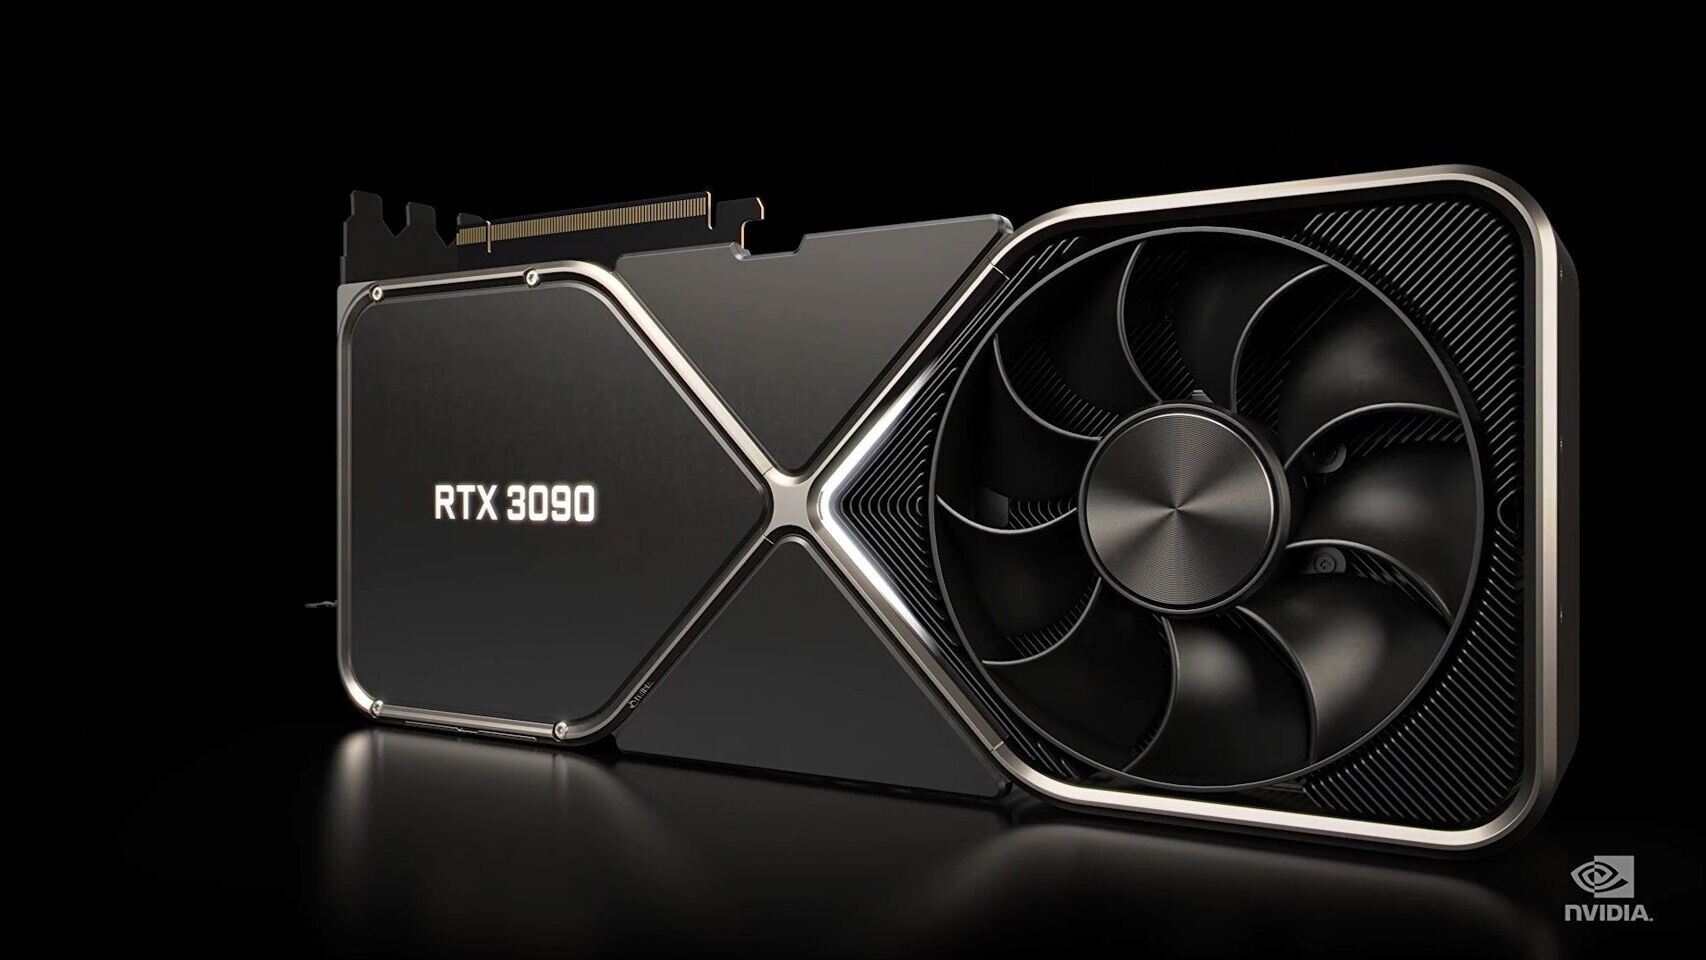 NVIDIA Enables GPU Passthrough for Machines on Consumer-Grade GeForce GPUs TechPowerUp